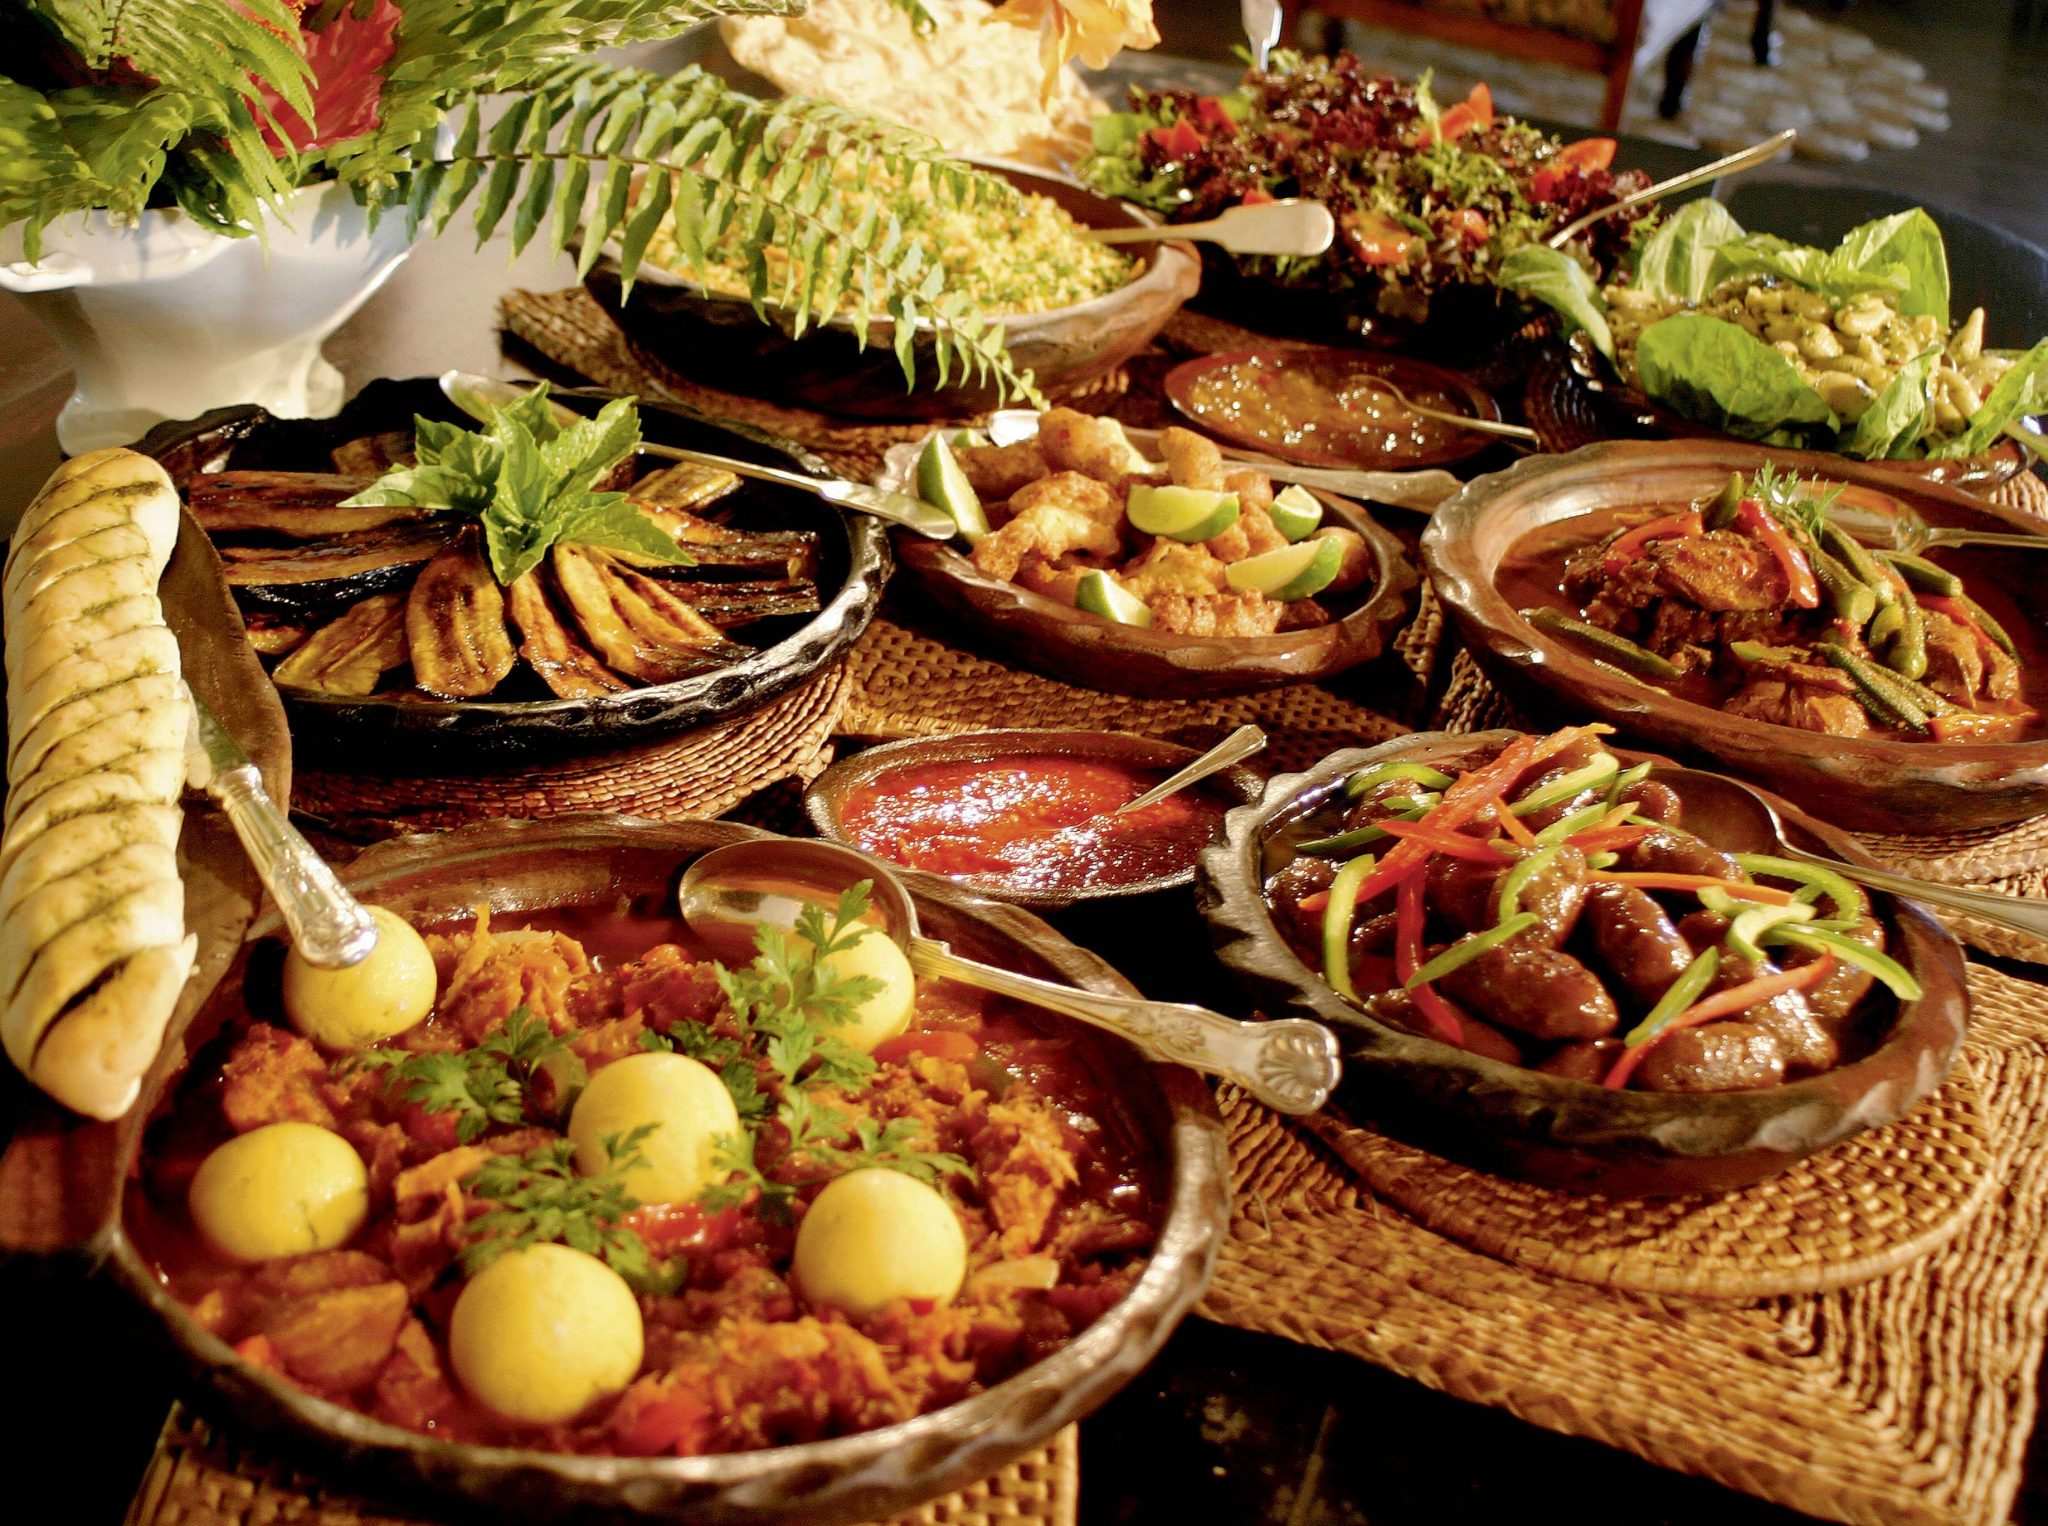 Taste the Caribbean and the unbeatable flavours of St. Kitts.